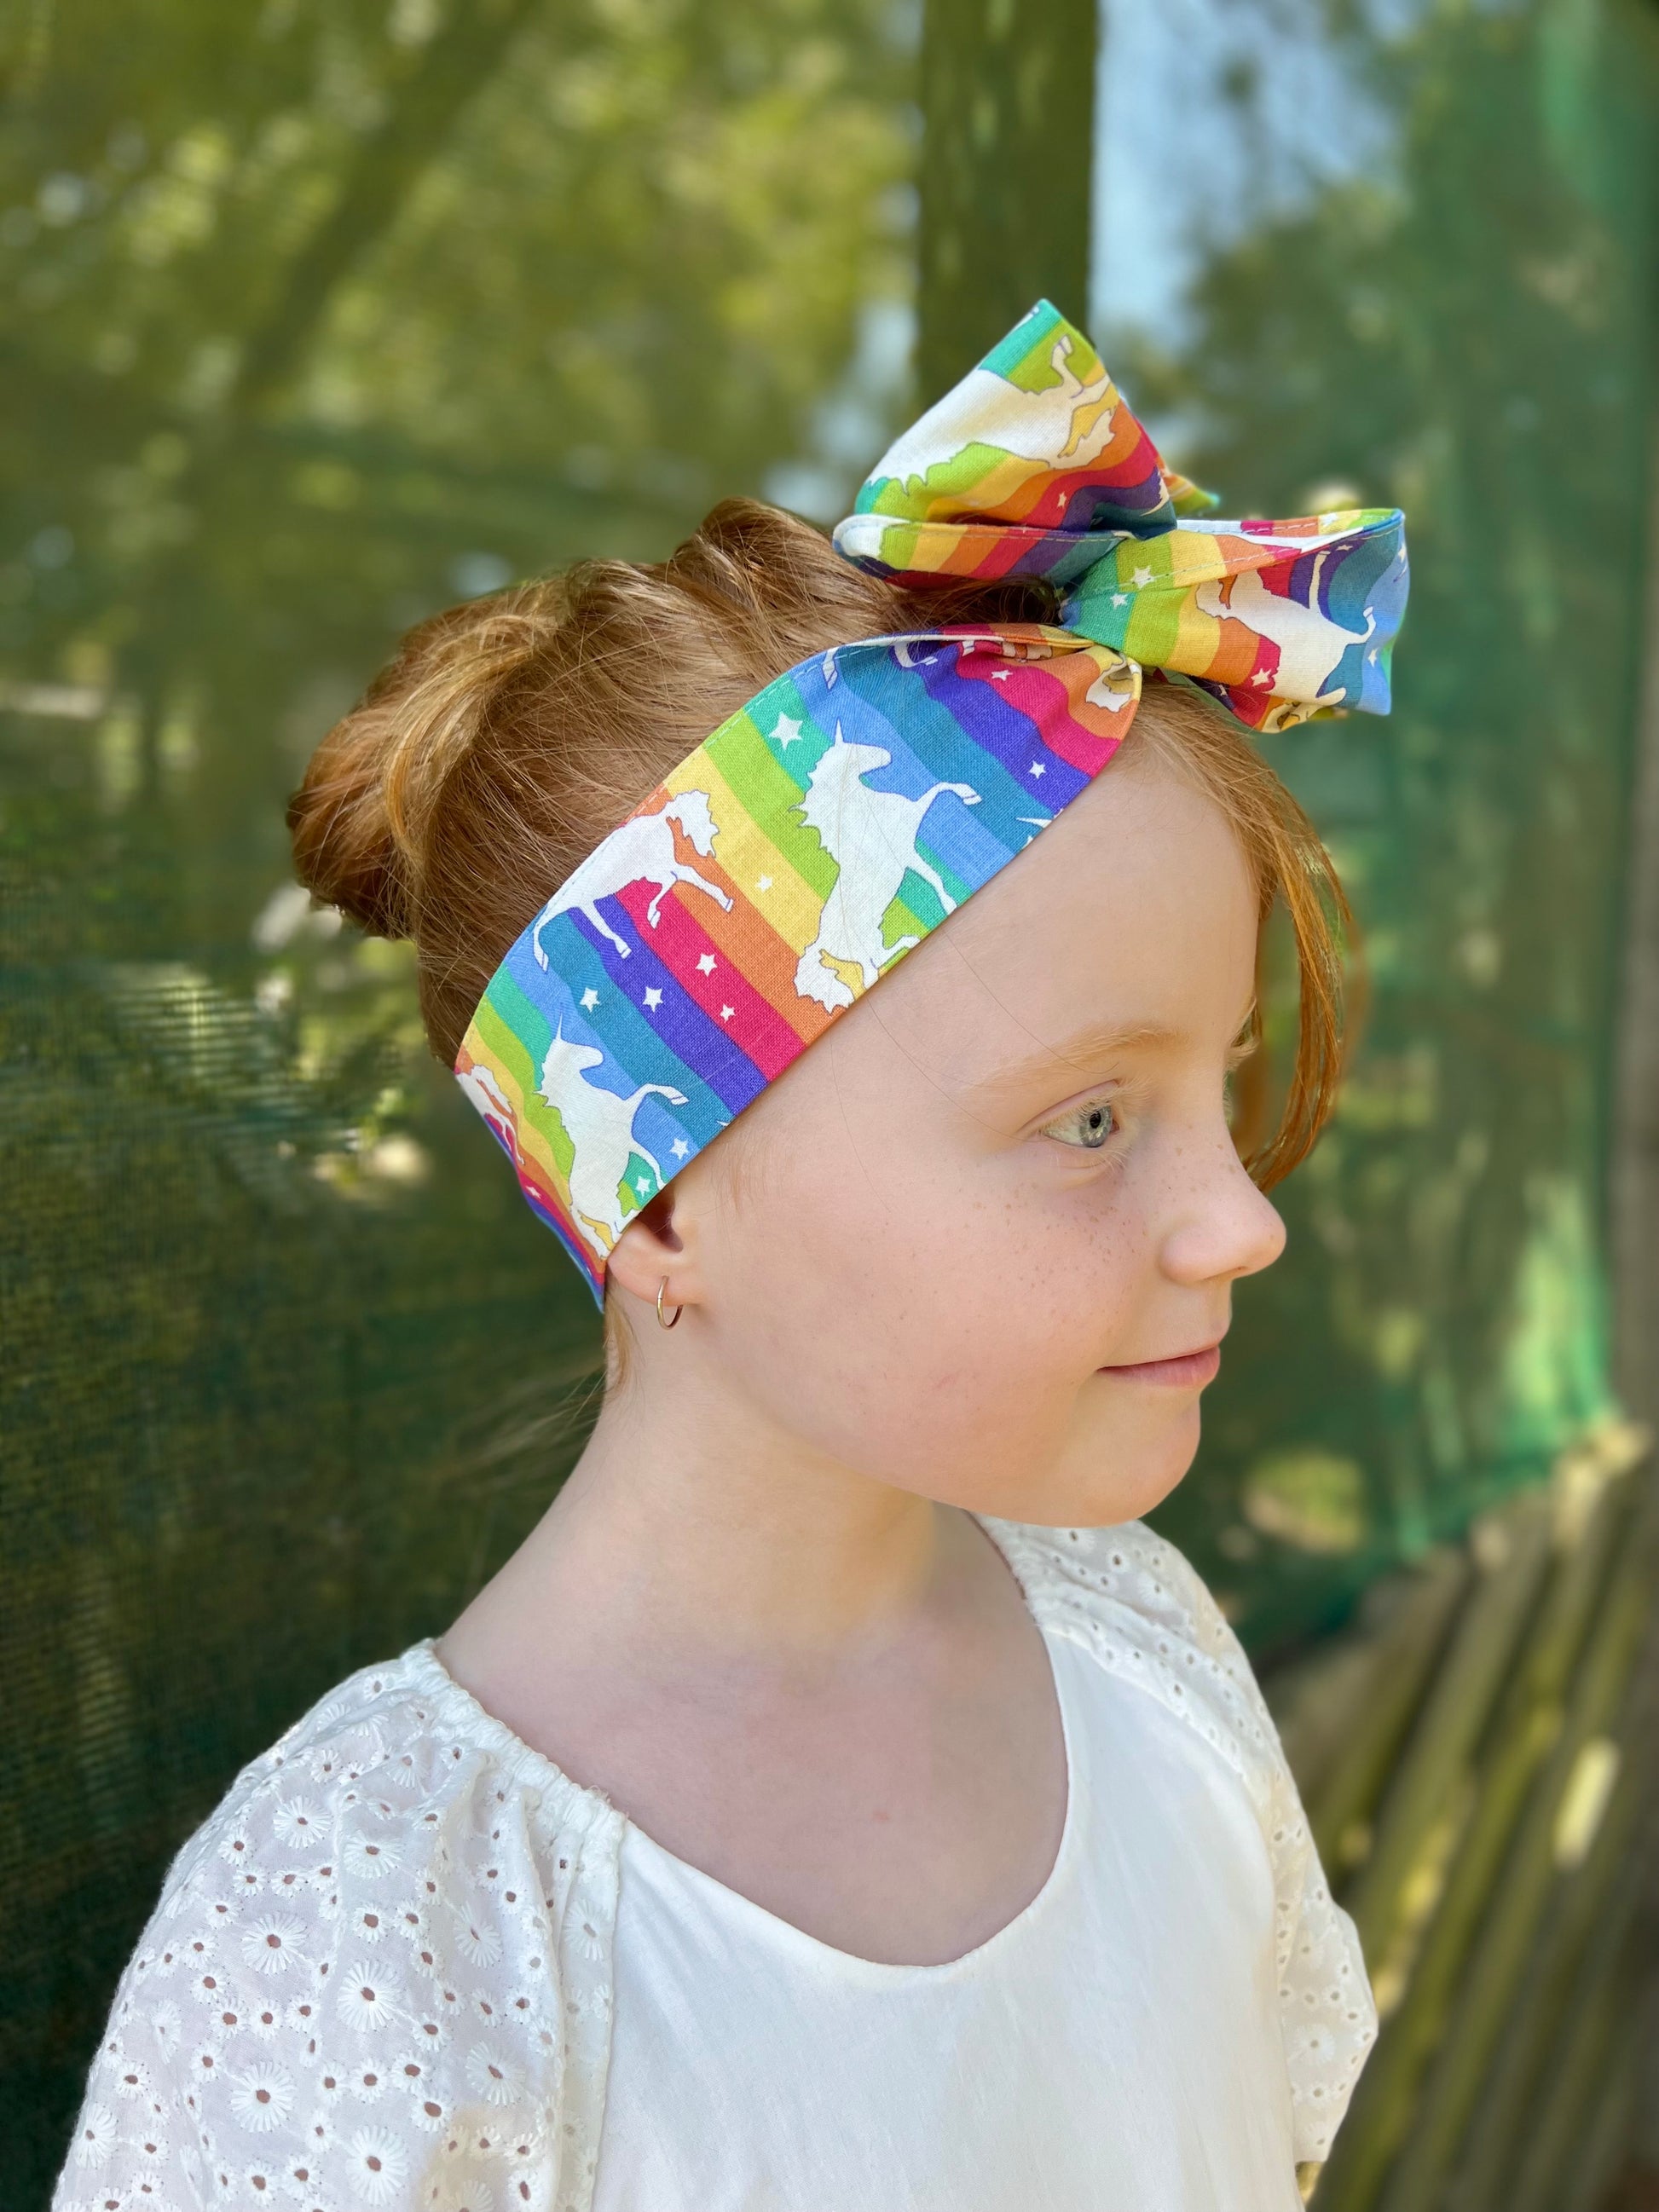 Rainbow Unicorn  -  Bae Kids Boho Wire Headband - Bae Bands Australia Twist Bow Wire Headband allows for your headband to stay in place all day with no headaches,